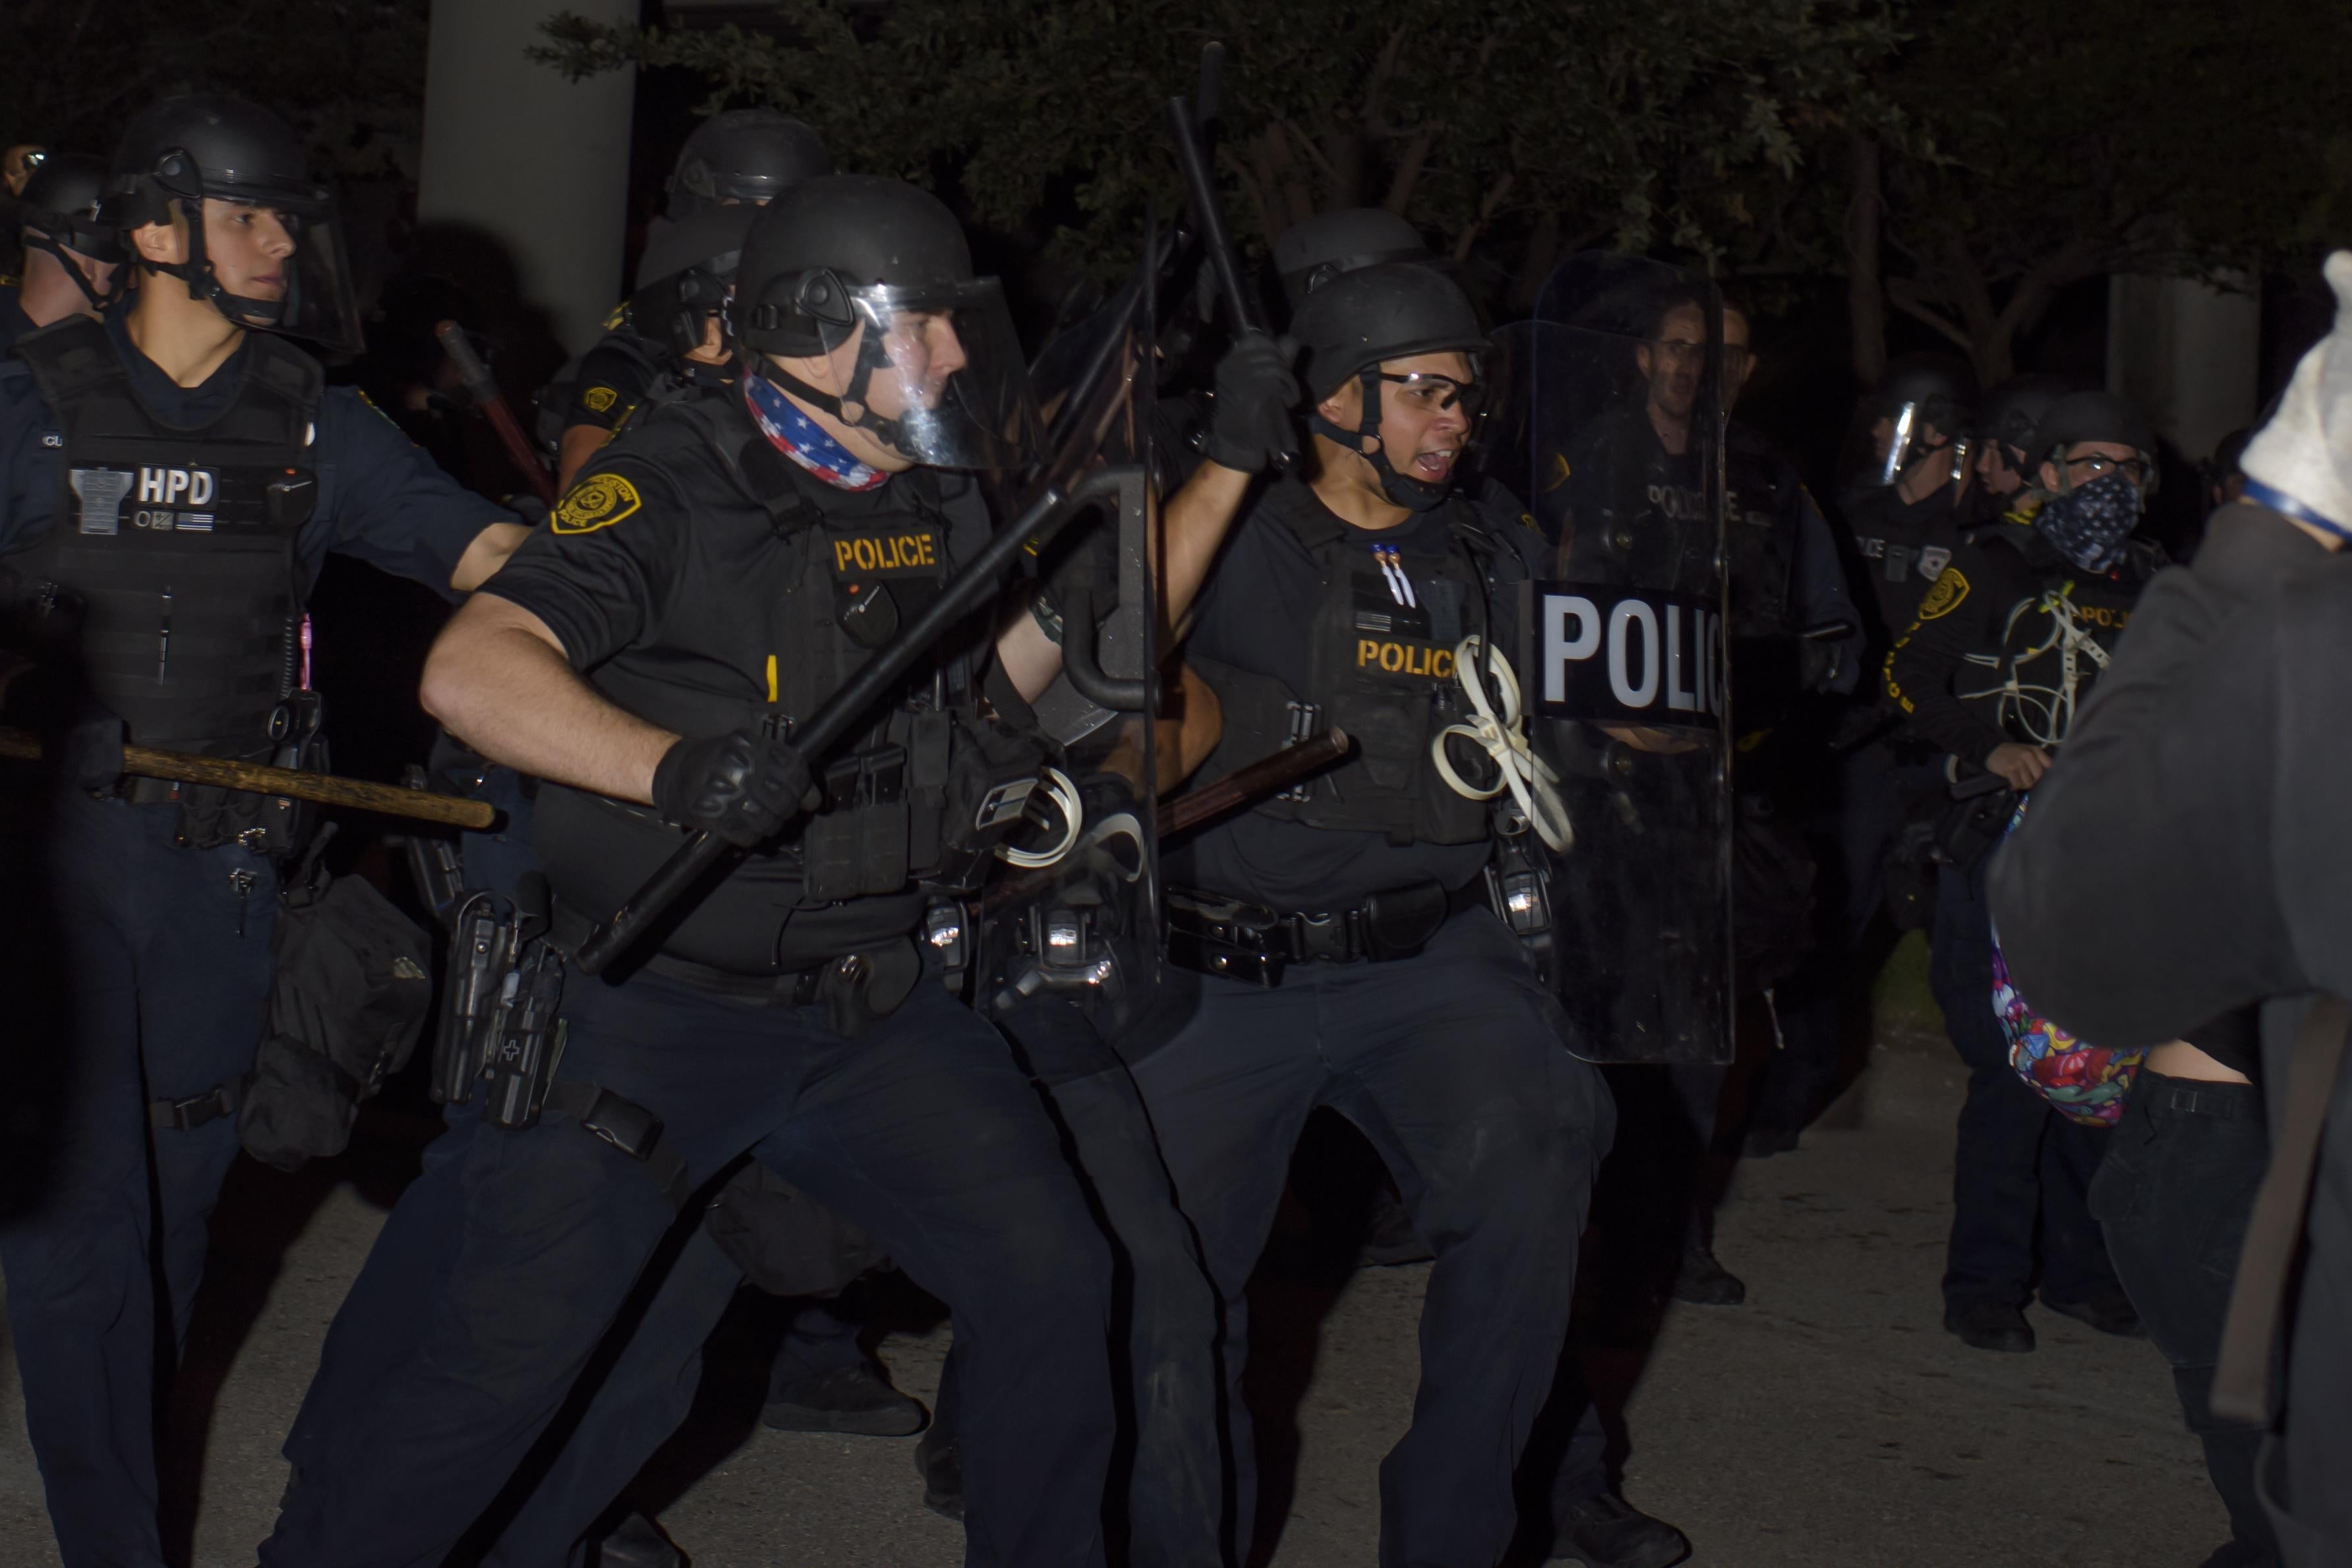 A group of police officers in riot gear with batons raised at night